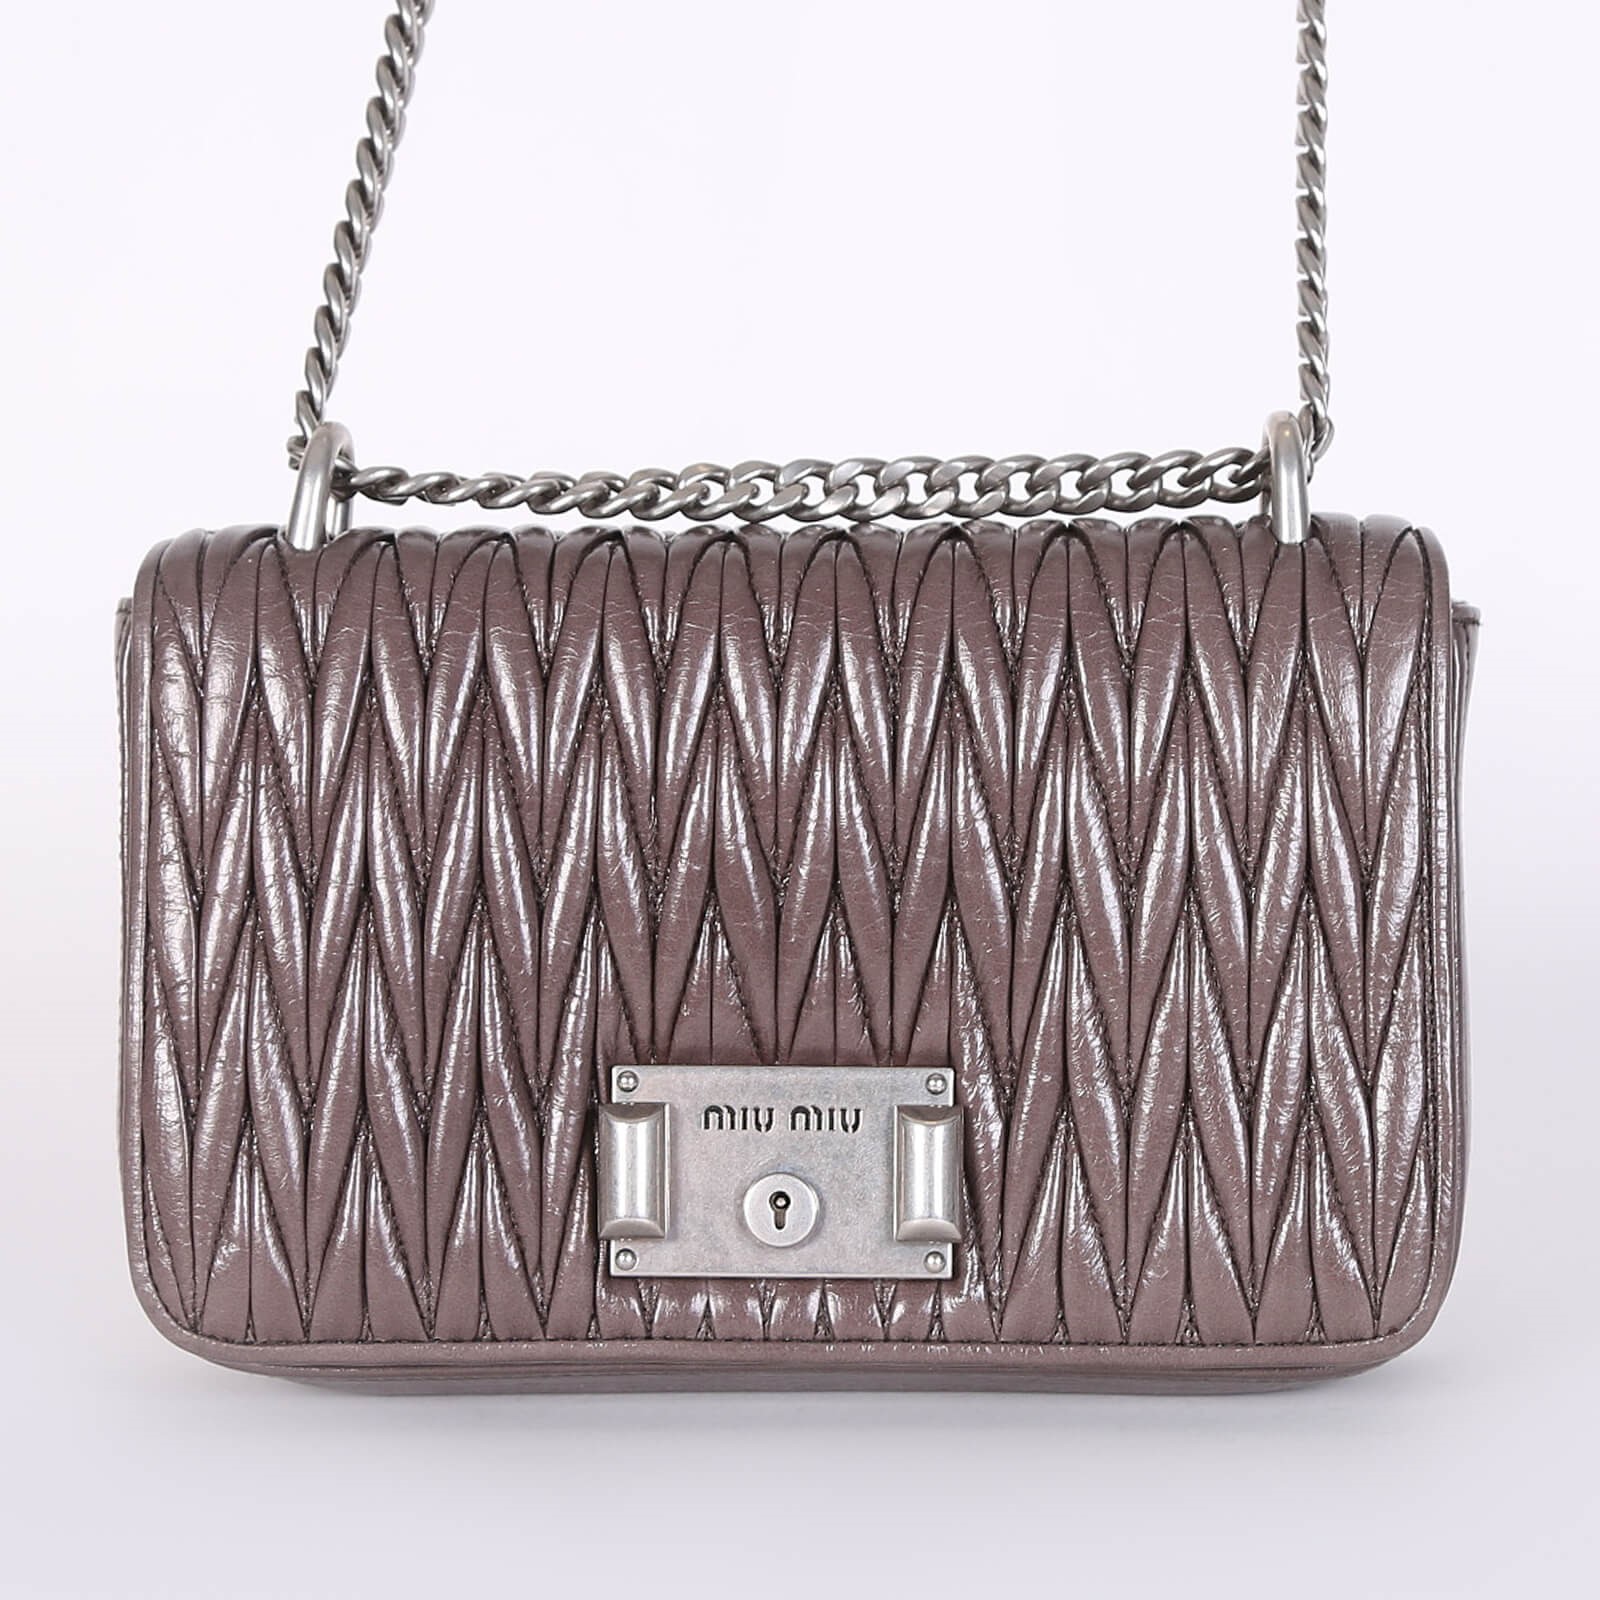 Miu Miu Shoulder Bags Outlet Genuine - Nappa Leather White